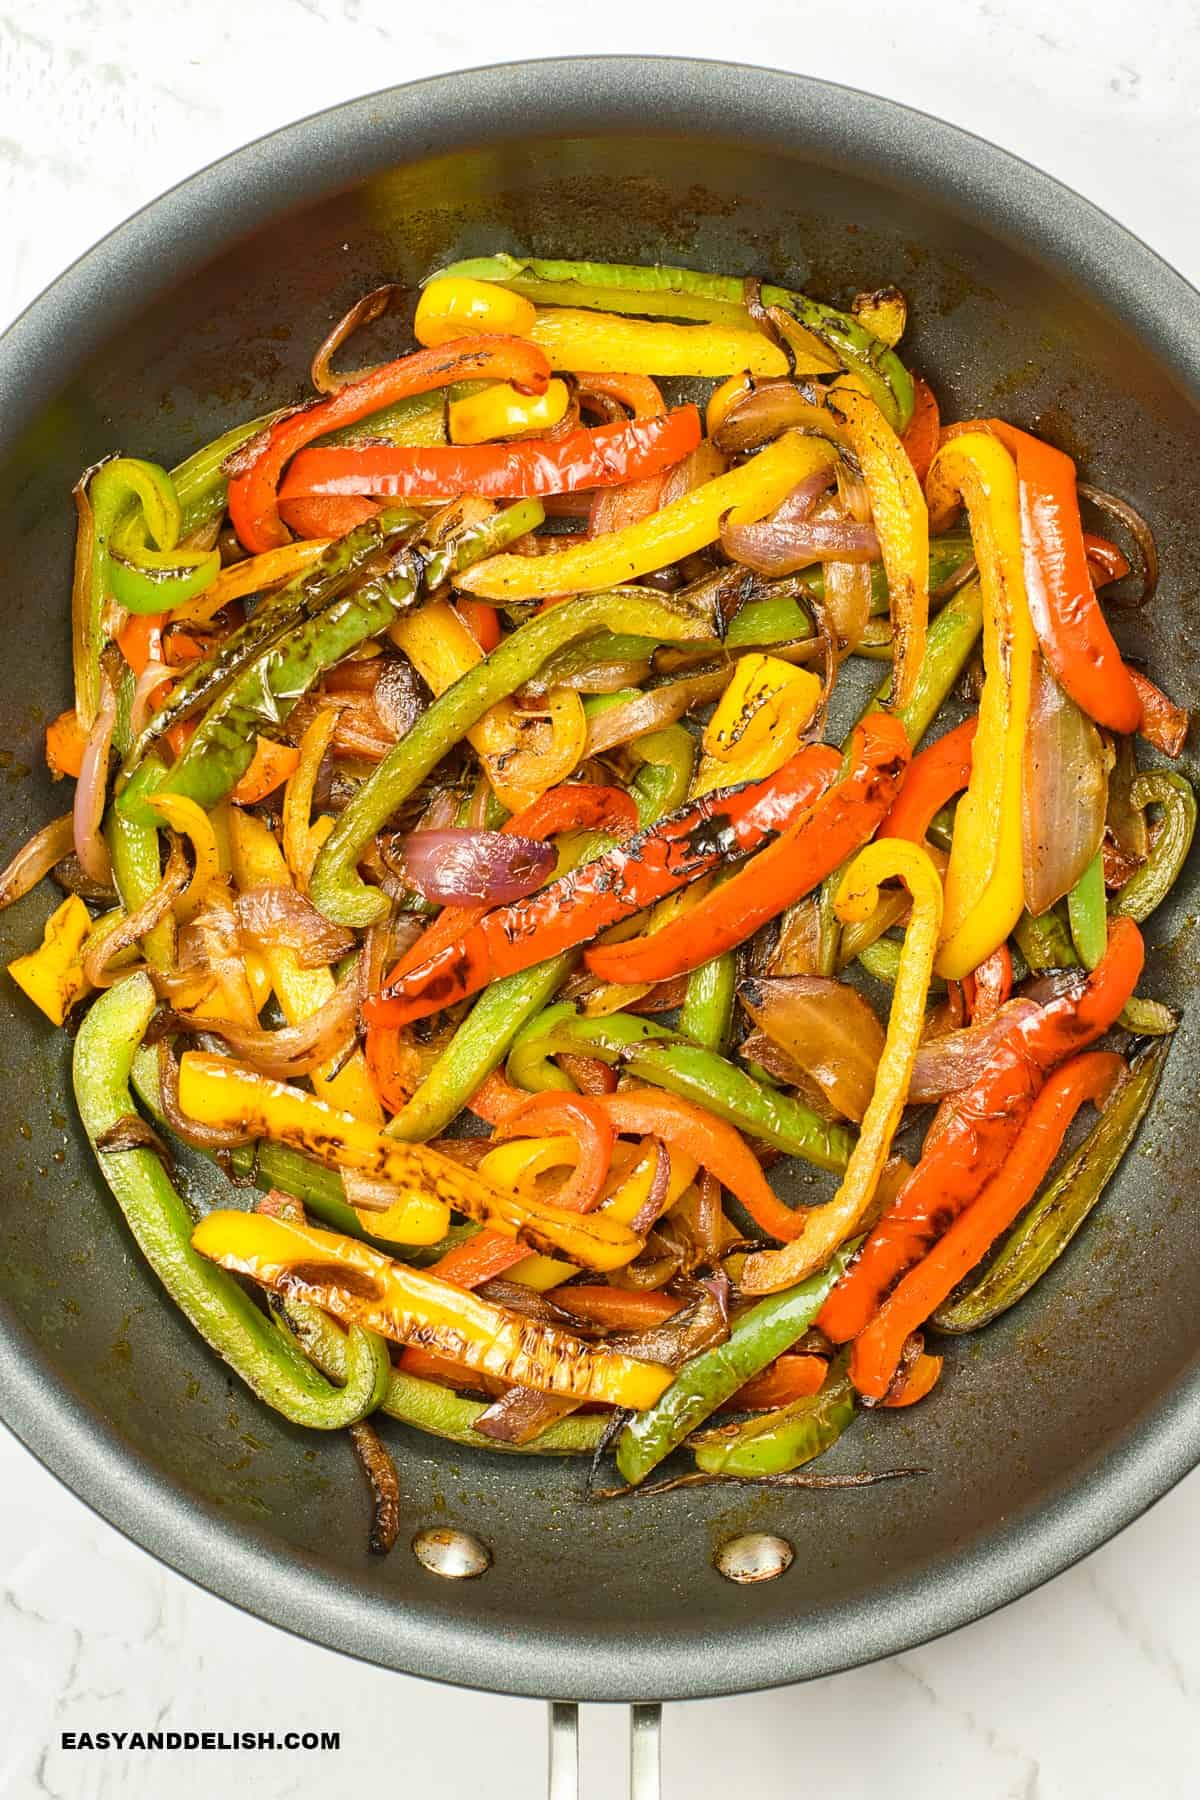 cooked onion adn bell peppers ina  skillet on the stovetop.